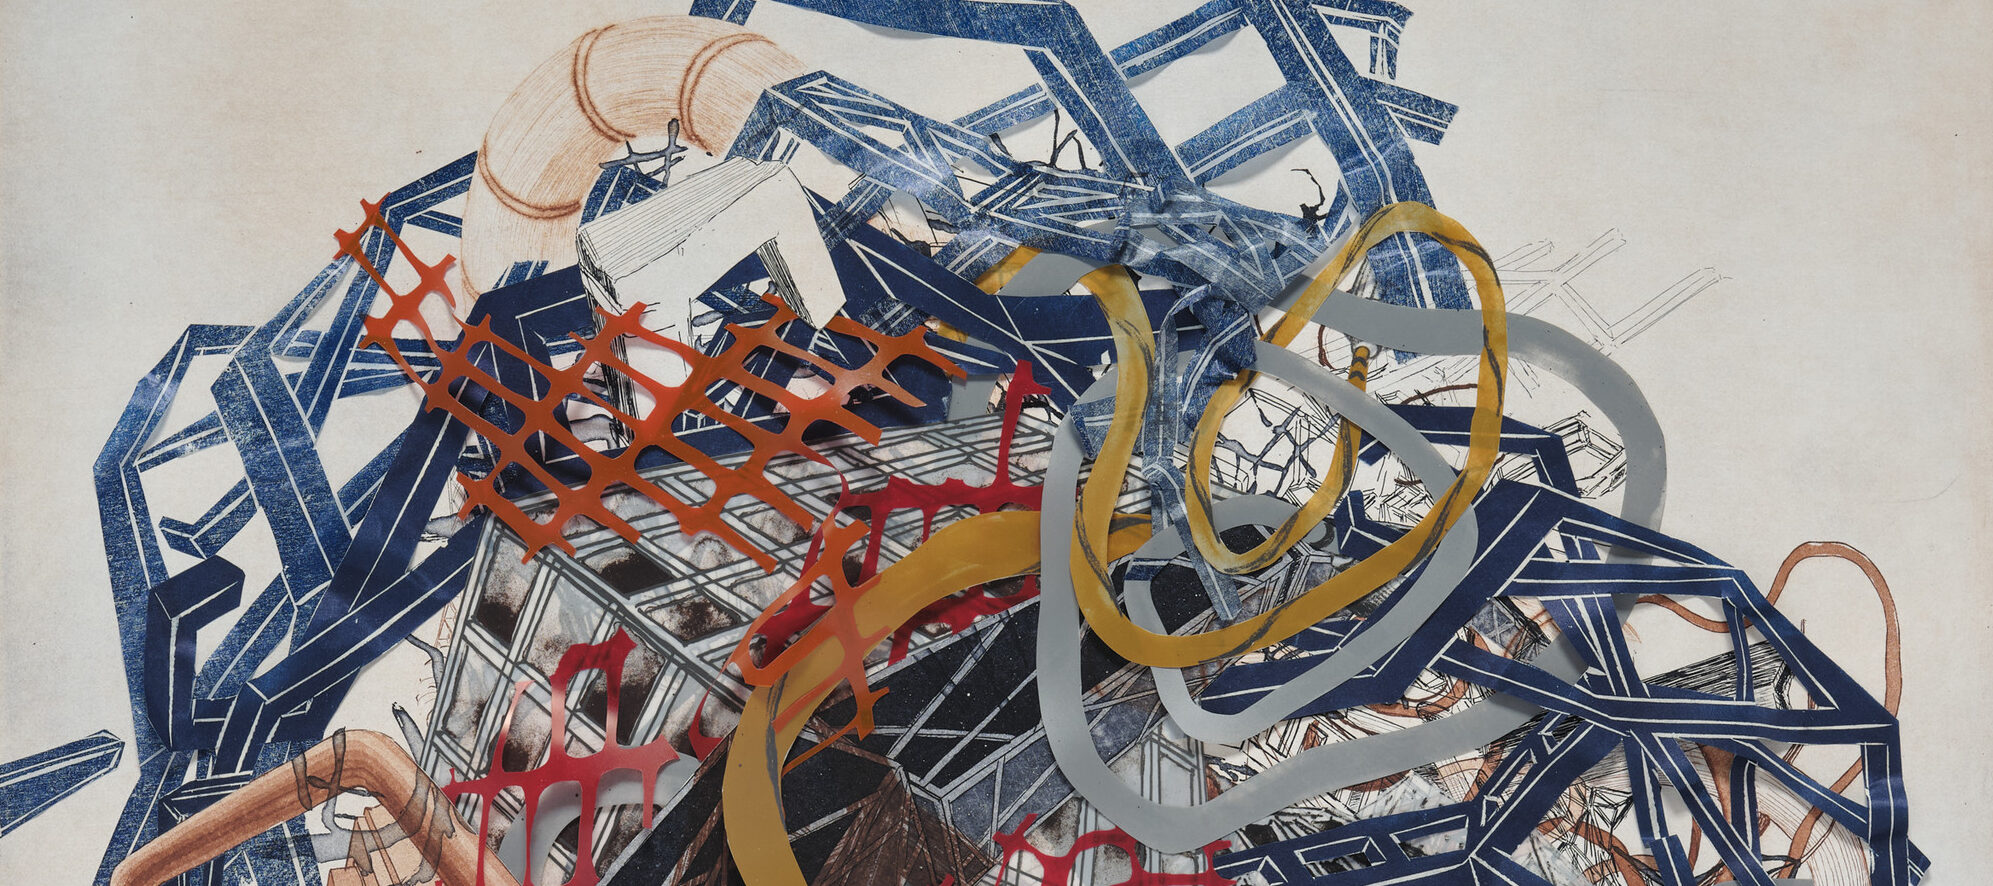 Mixed media work on paper depicts a tangle of colorful forms in the center of the paper. Some forms are printed abstracted architectural structures and pipes. Other forms are made out of mylar and represent hoses and plastic fencing.